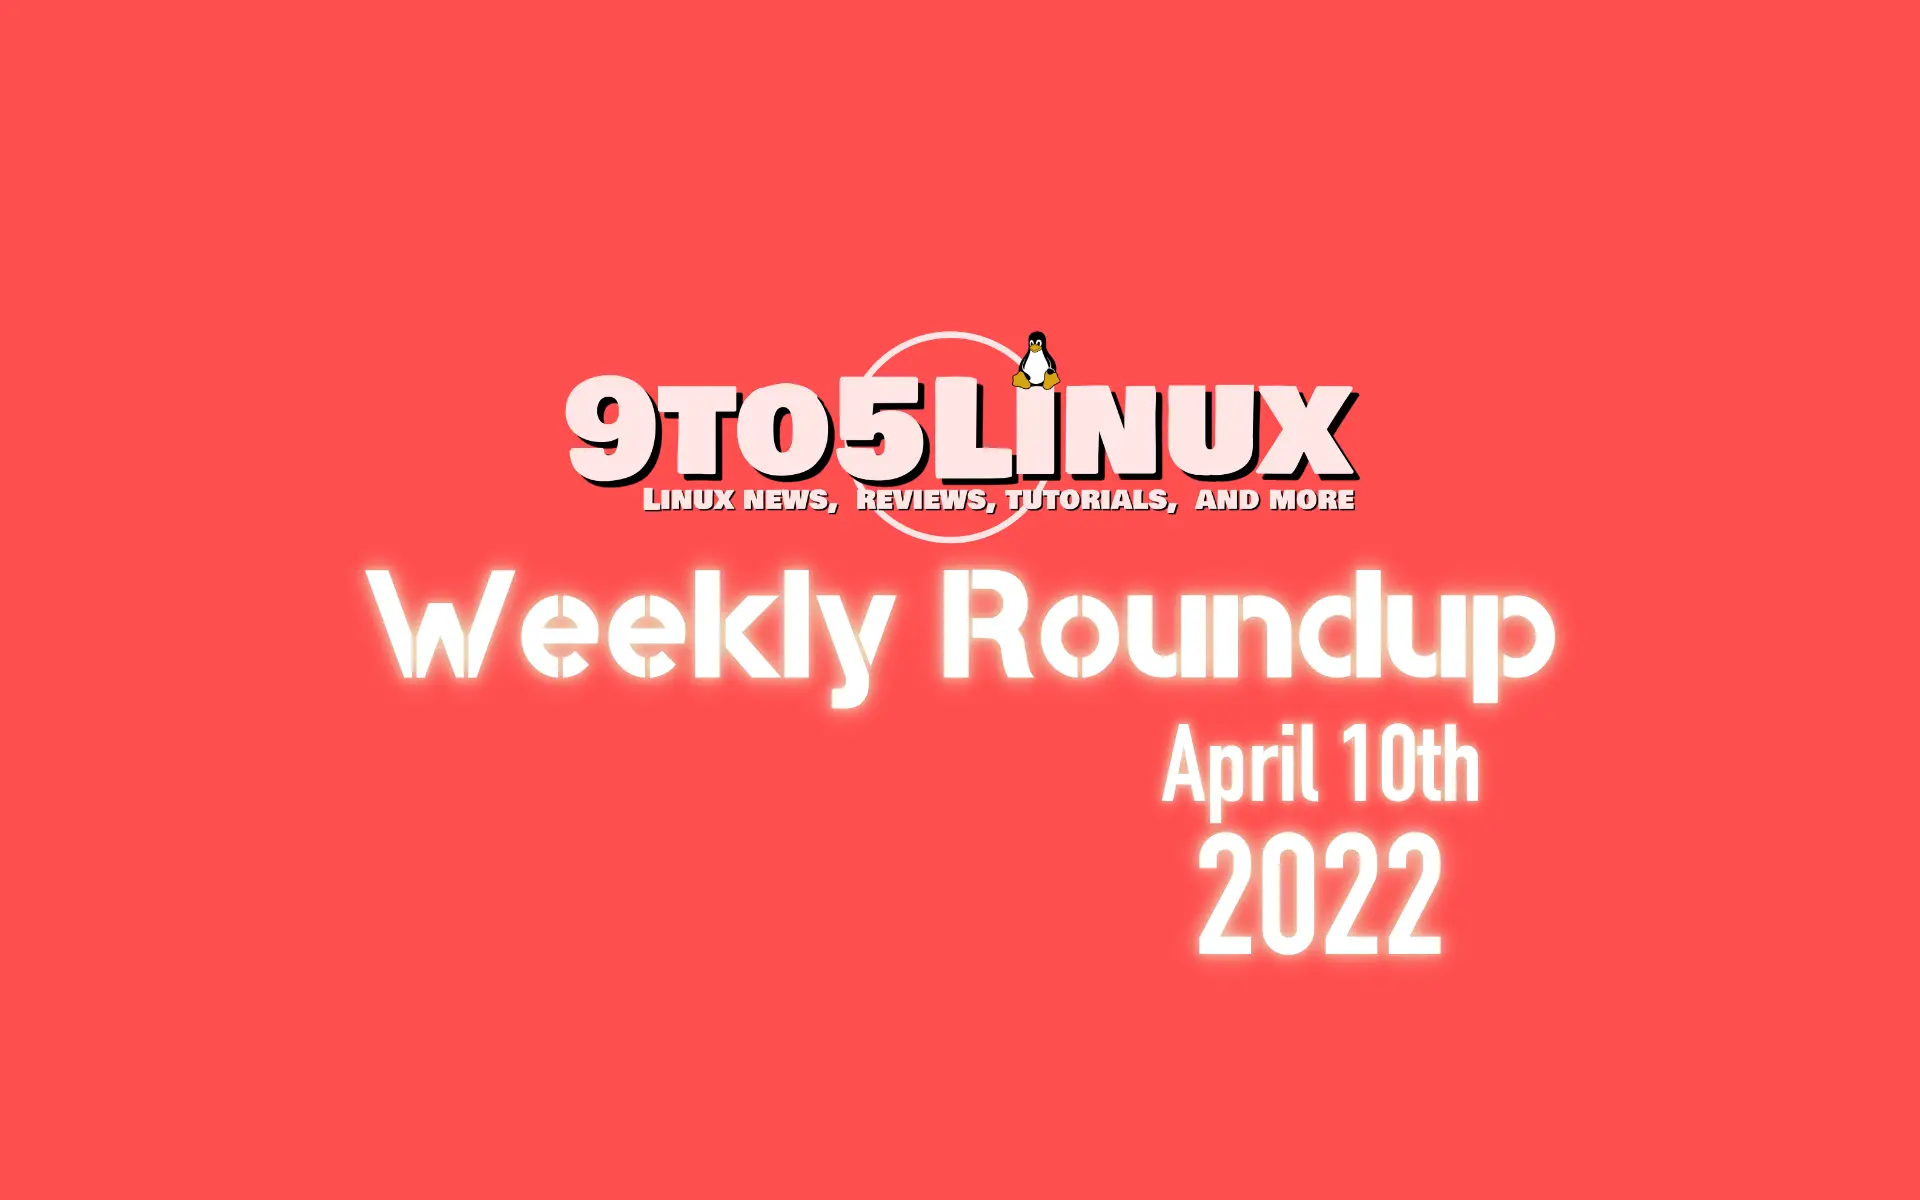 9to5Linux Weekly Roundup: April 10th, 2022